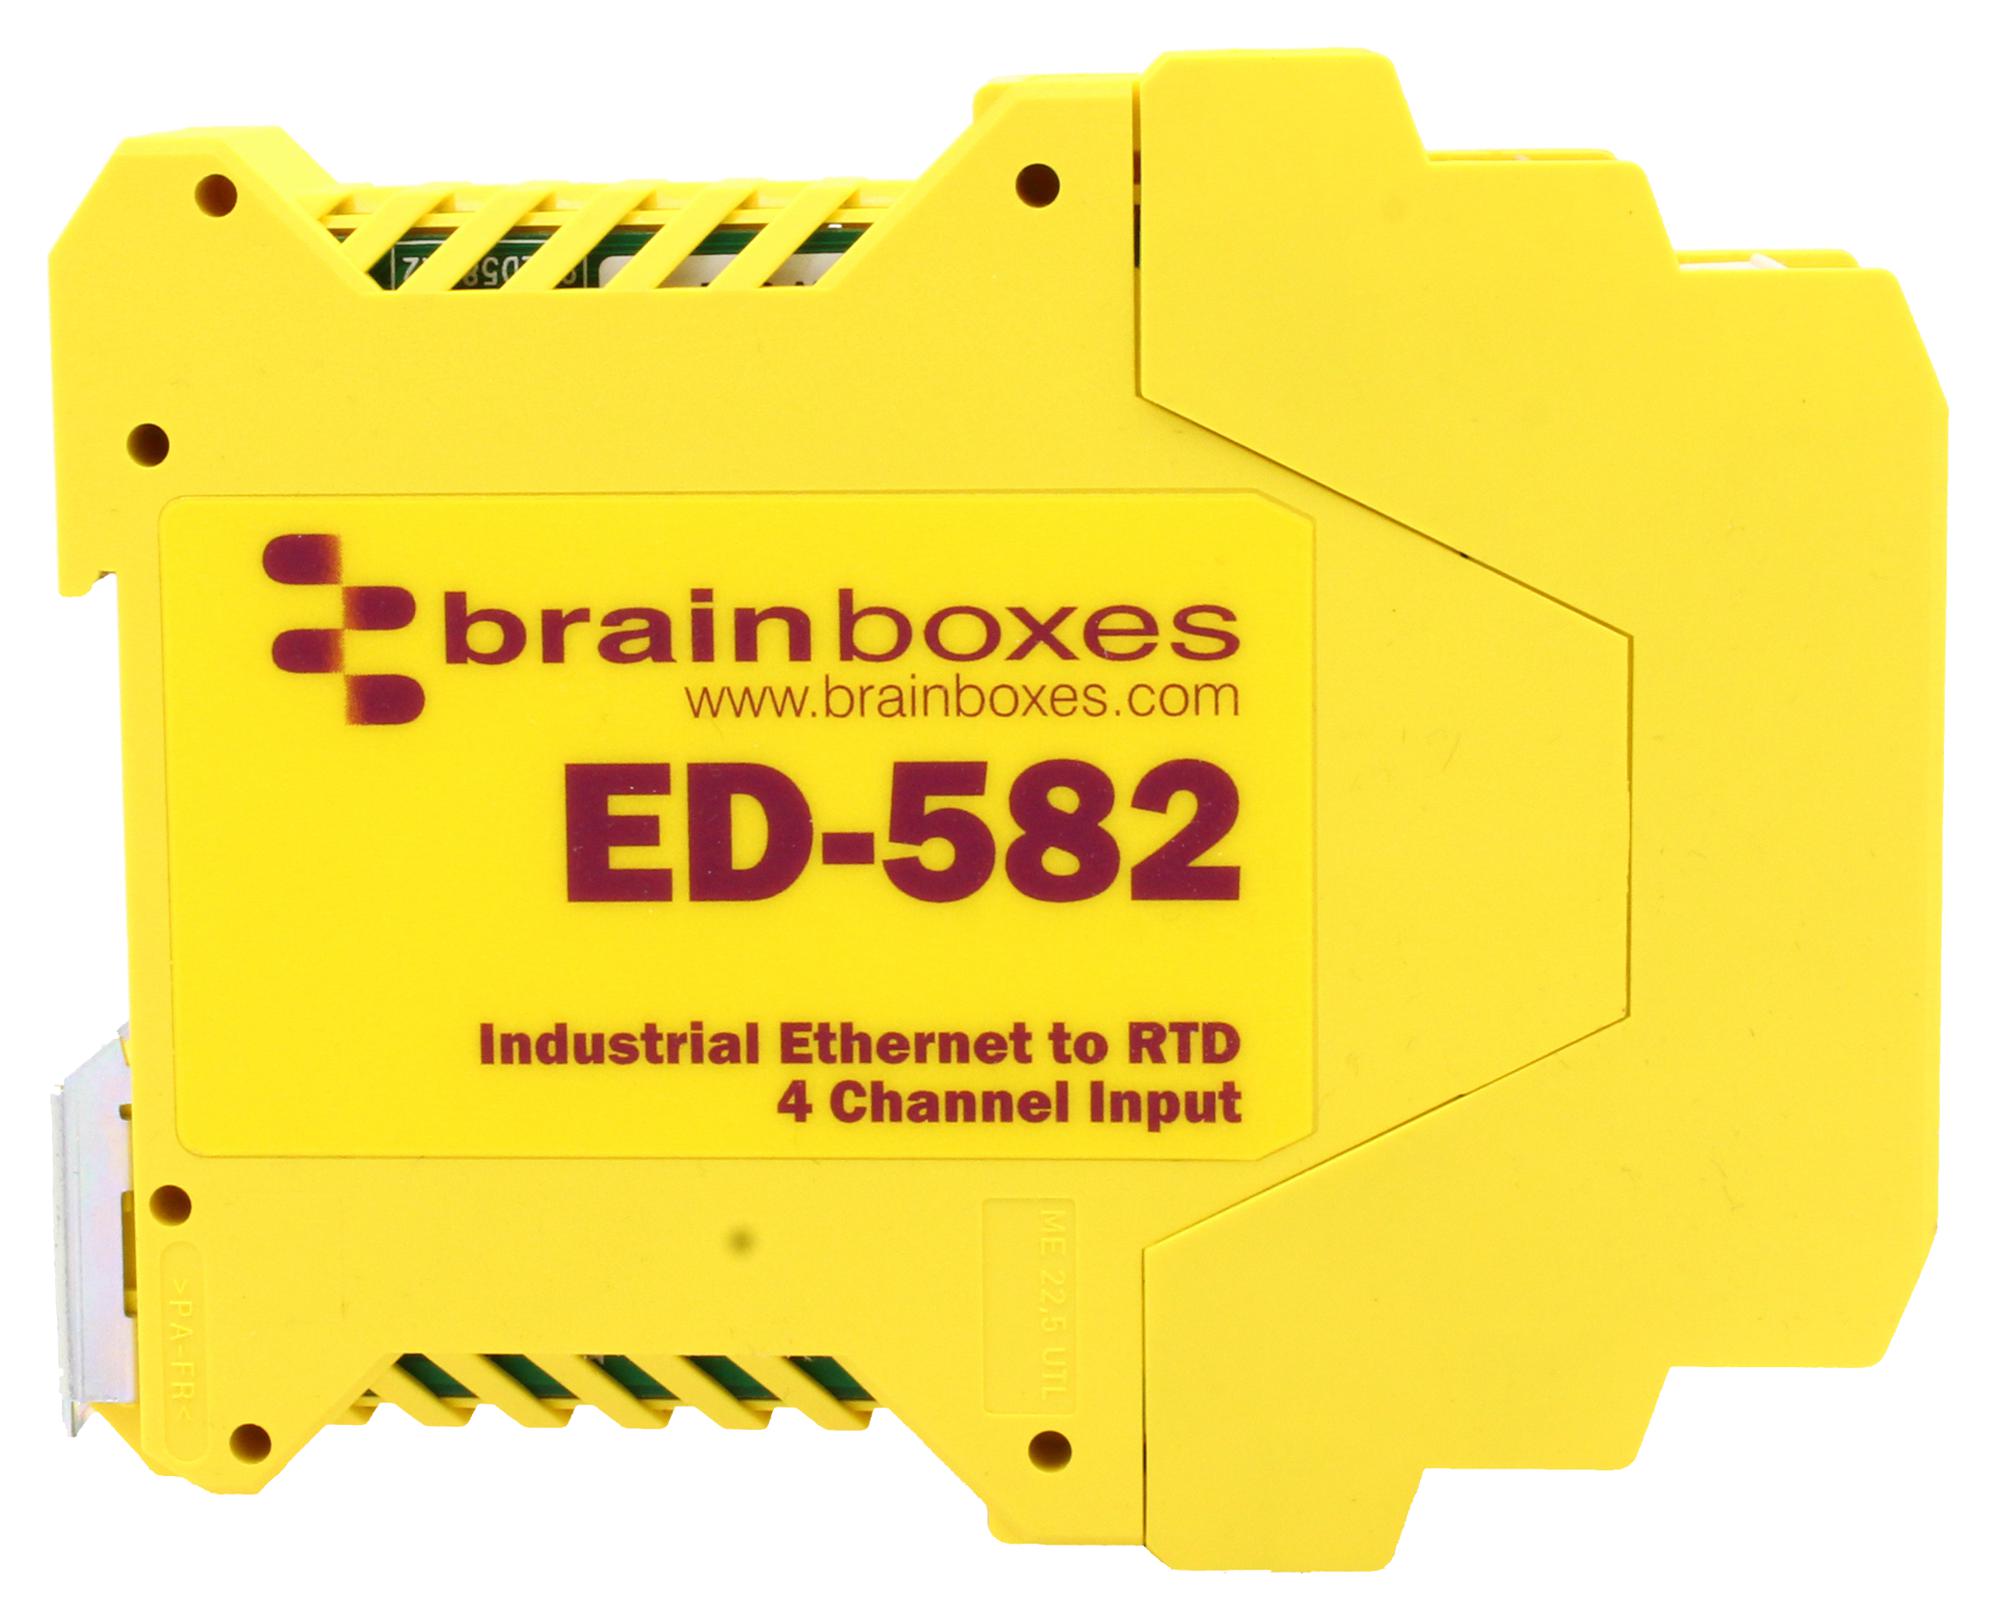 ED-582 ETHERNET TO 4 CHANNEL RTD INPUT BRAINBOXES